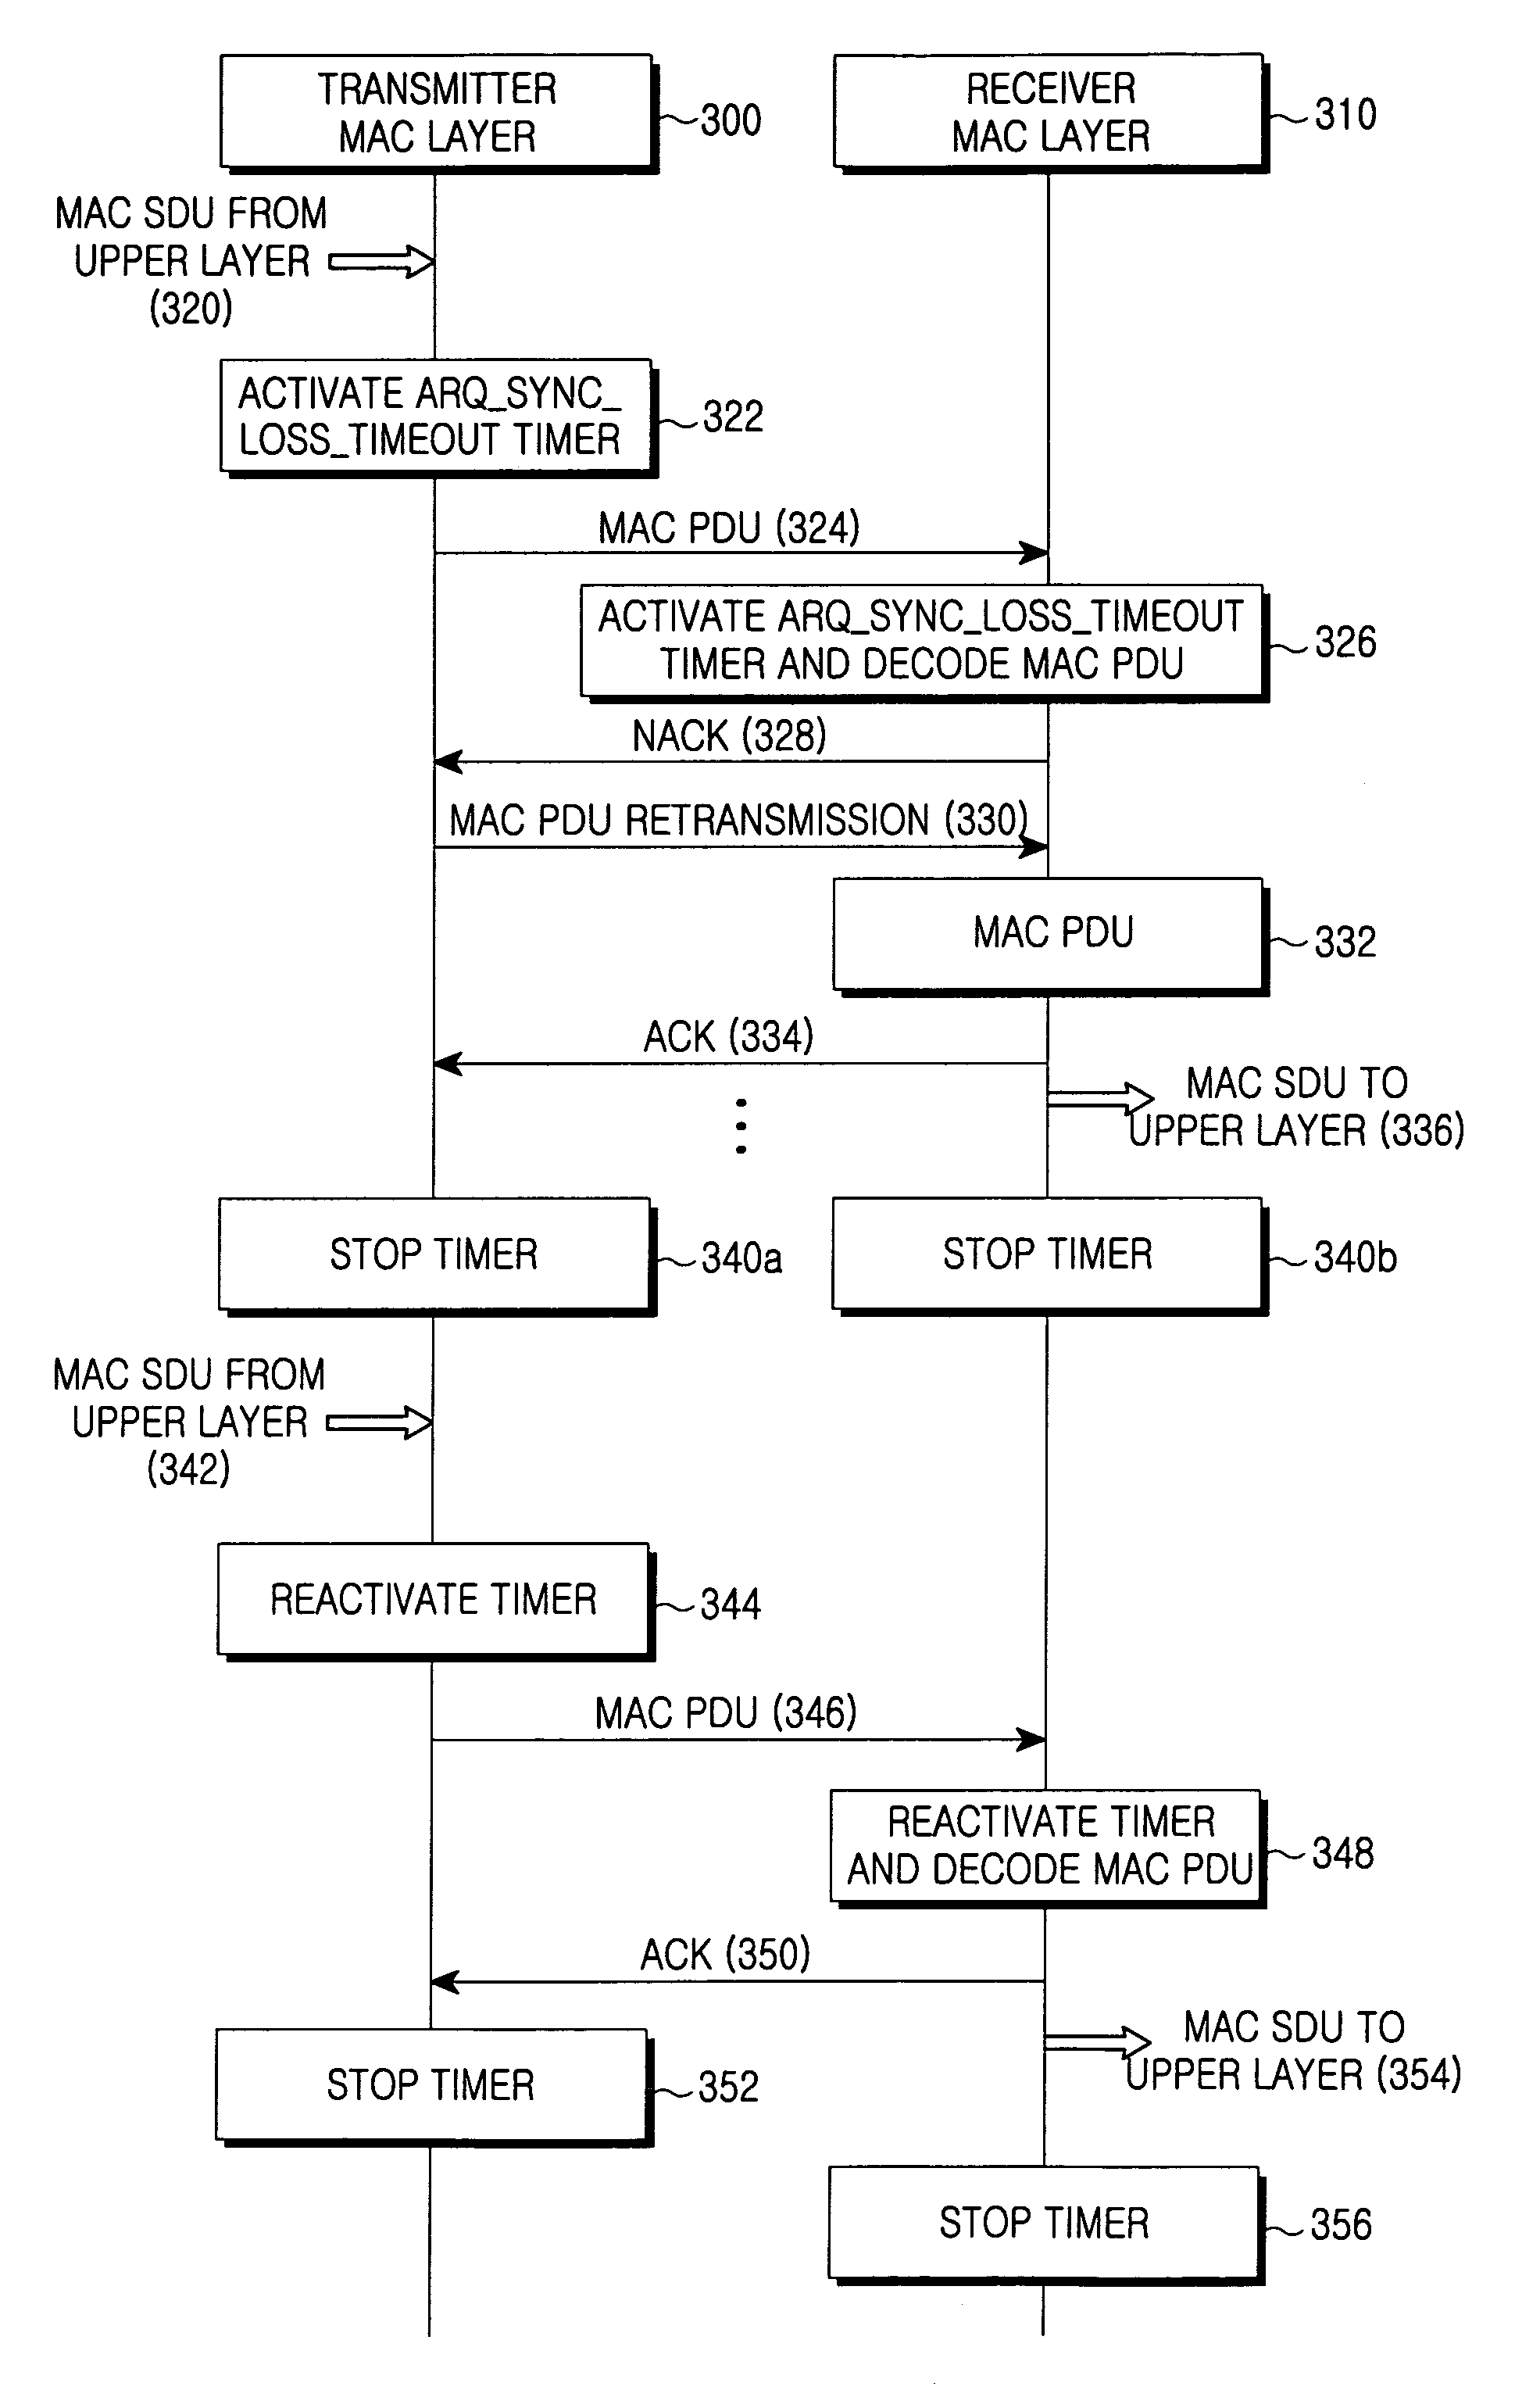 Auto re-transmission request method in a wireless communication system